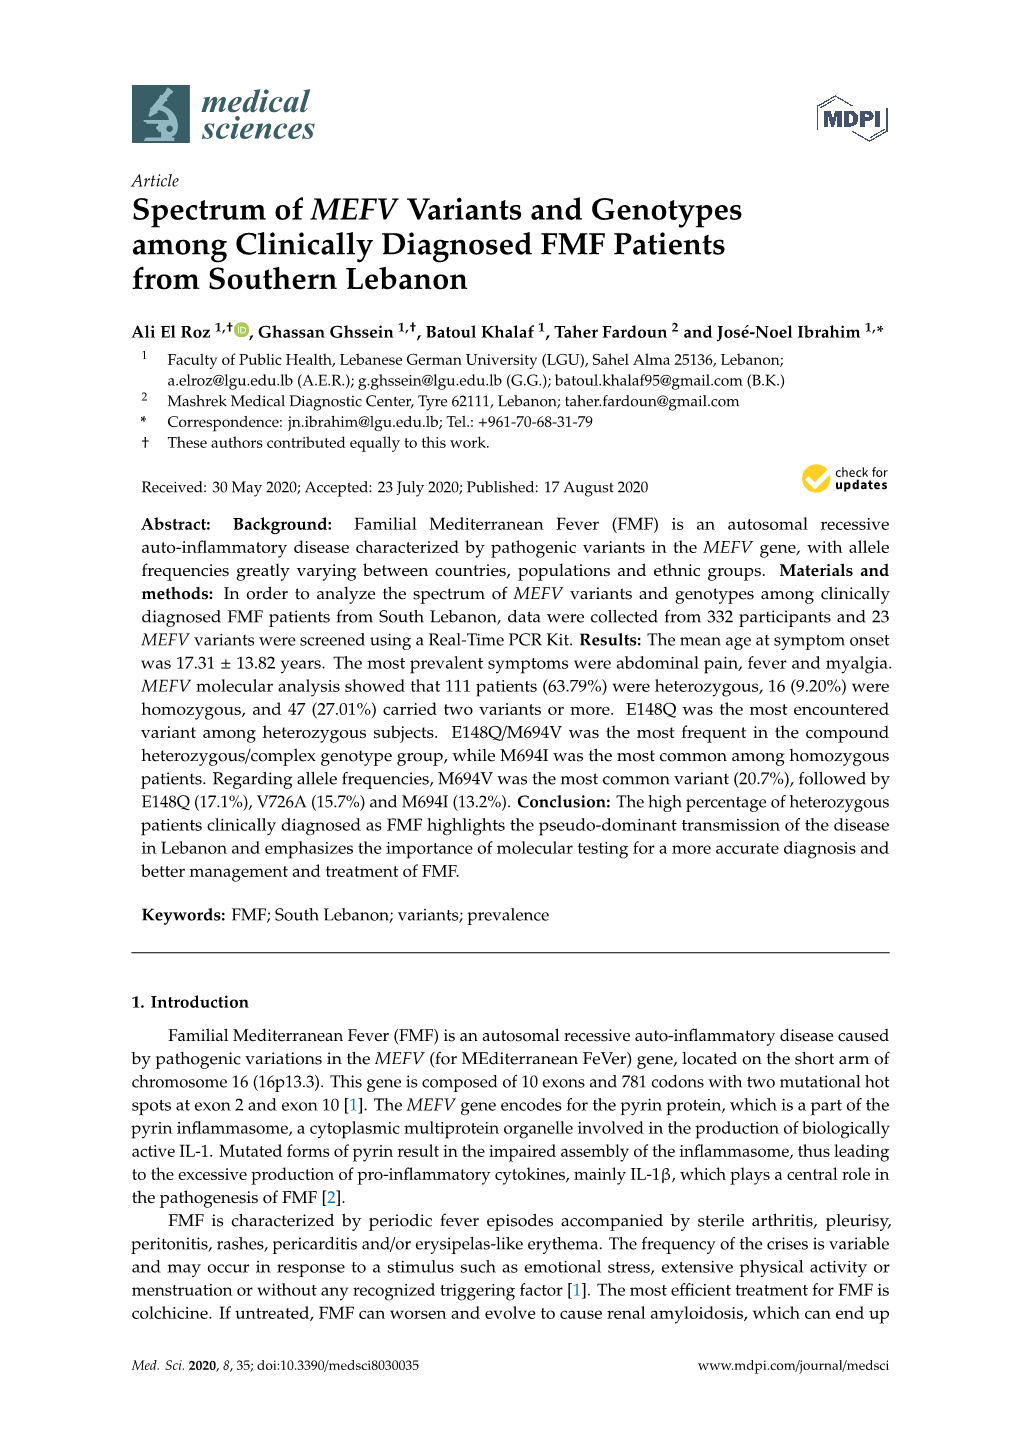 Spectrum of MEFV Variants and Genotypes Among Clinically Diagnosed FMF Patients from Southern Lebanon